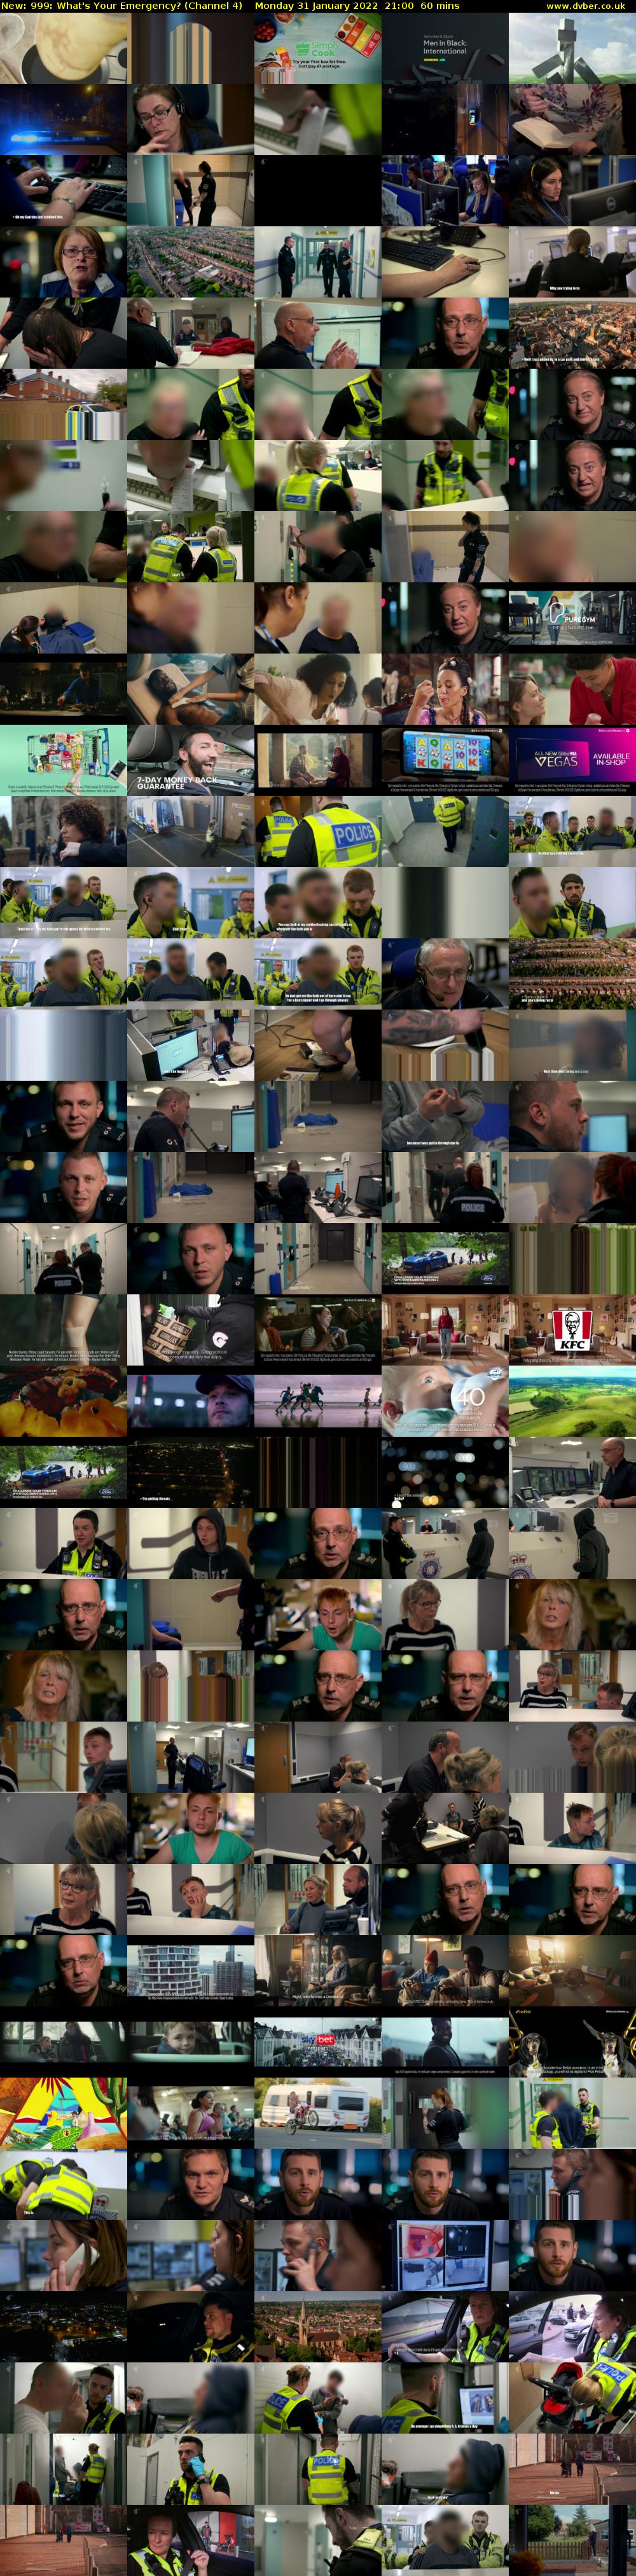 999: What's Your Emergency? (Channel 4) Monday 31 January 2022 21:00 - 22:00